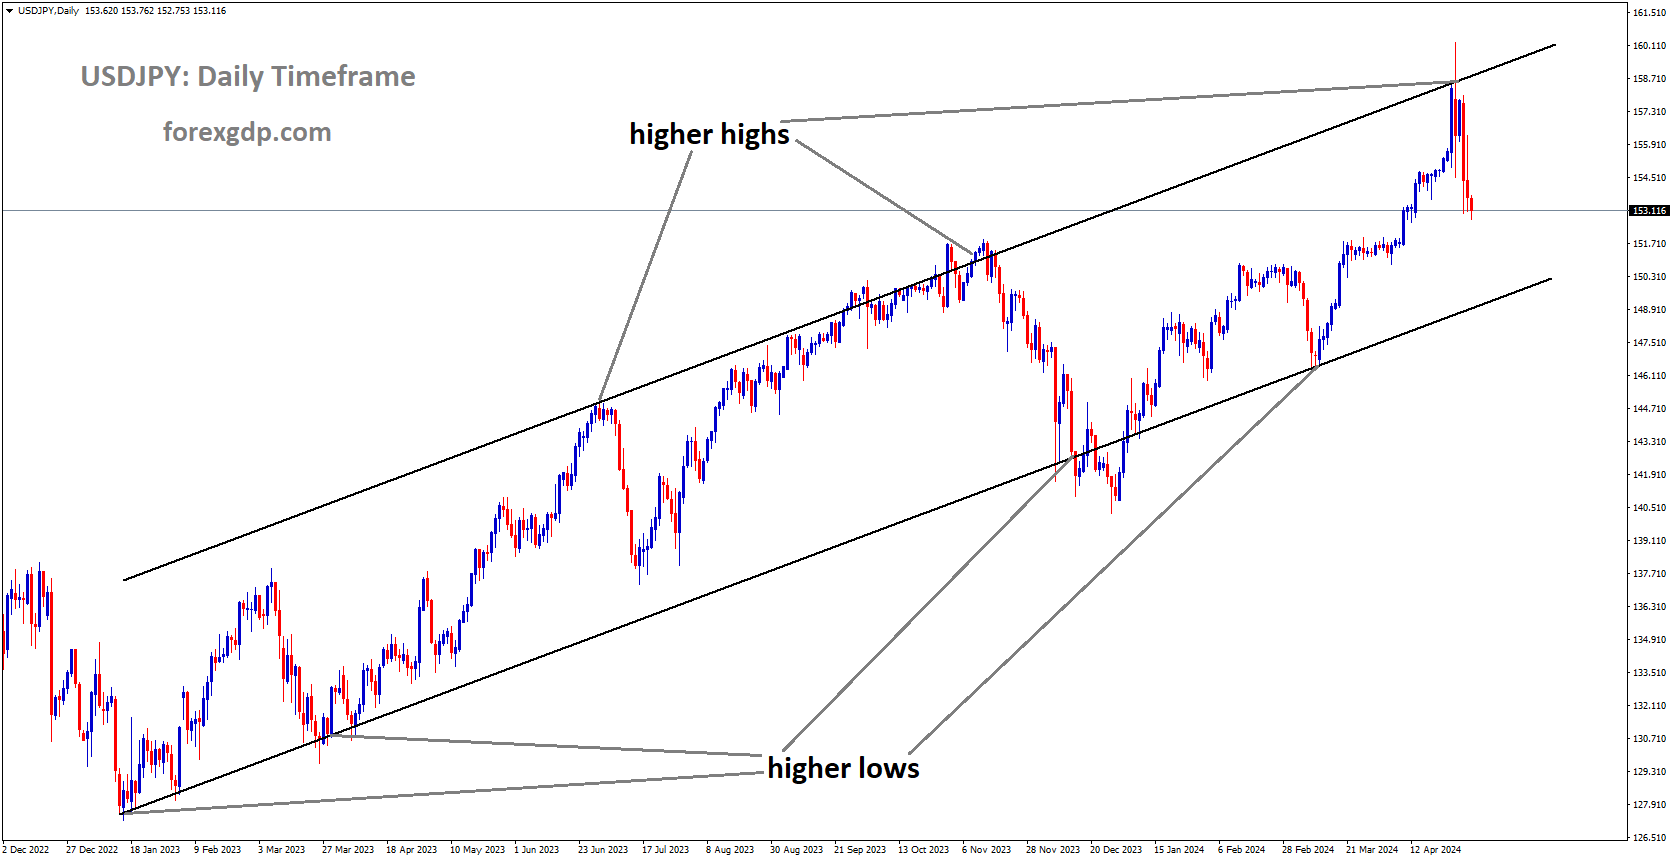 USDJPY is moving in Ascending channel and market has fallen from the higher high area of the channel